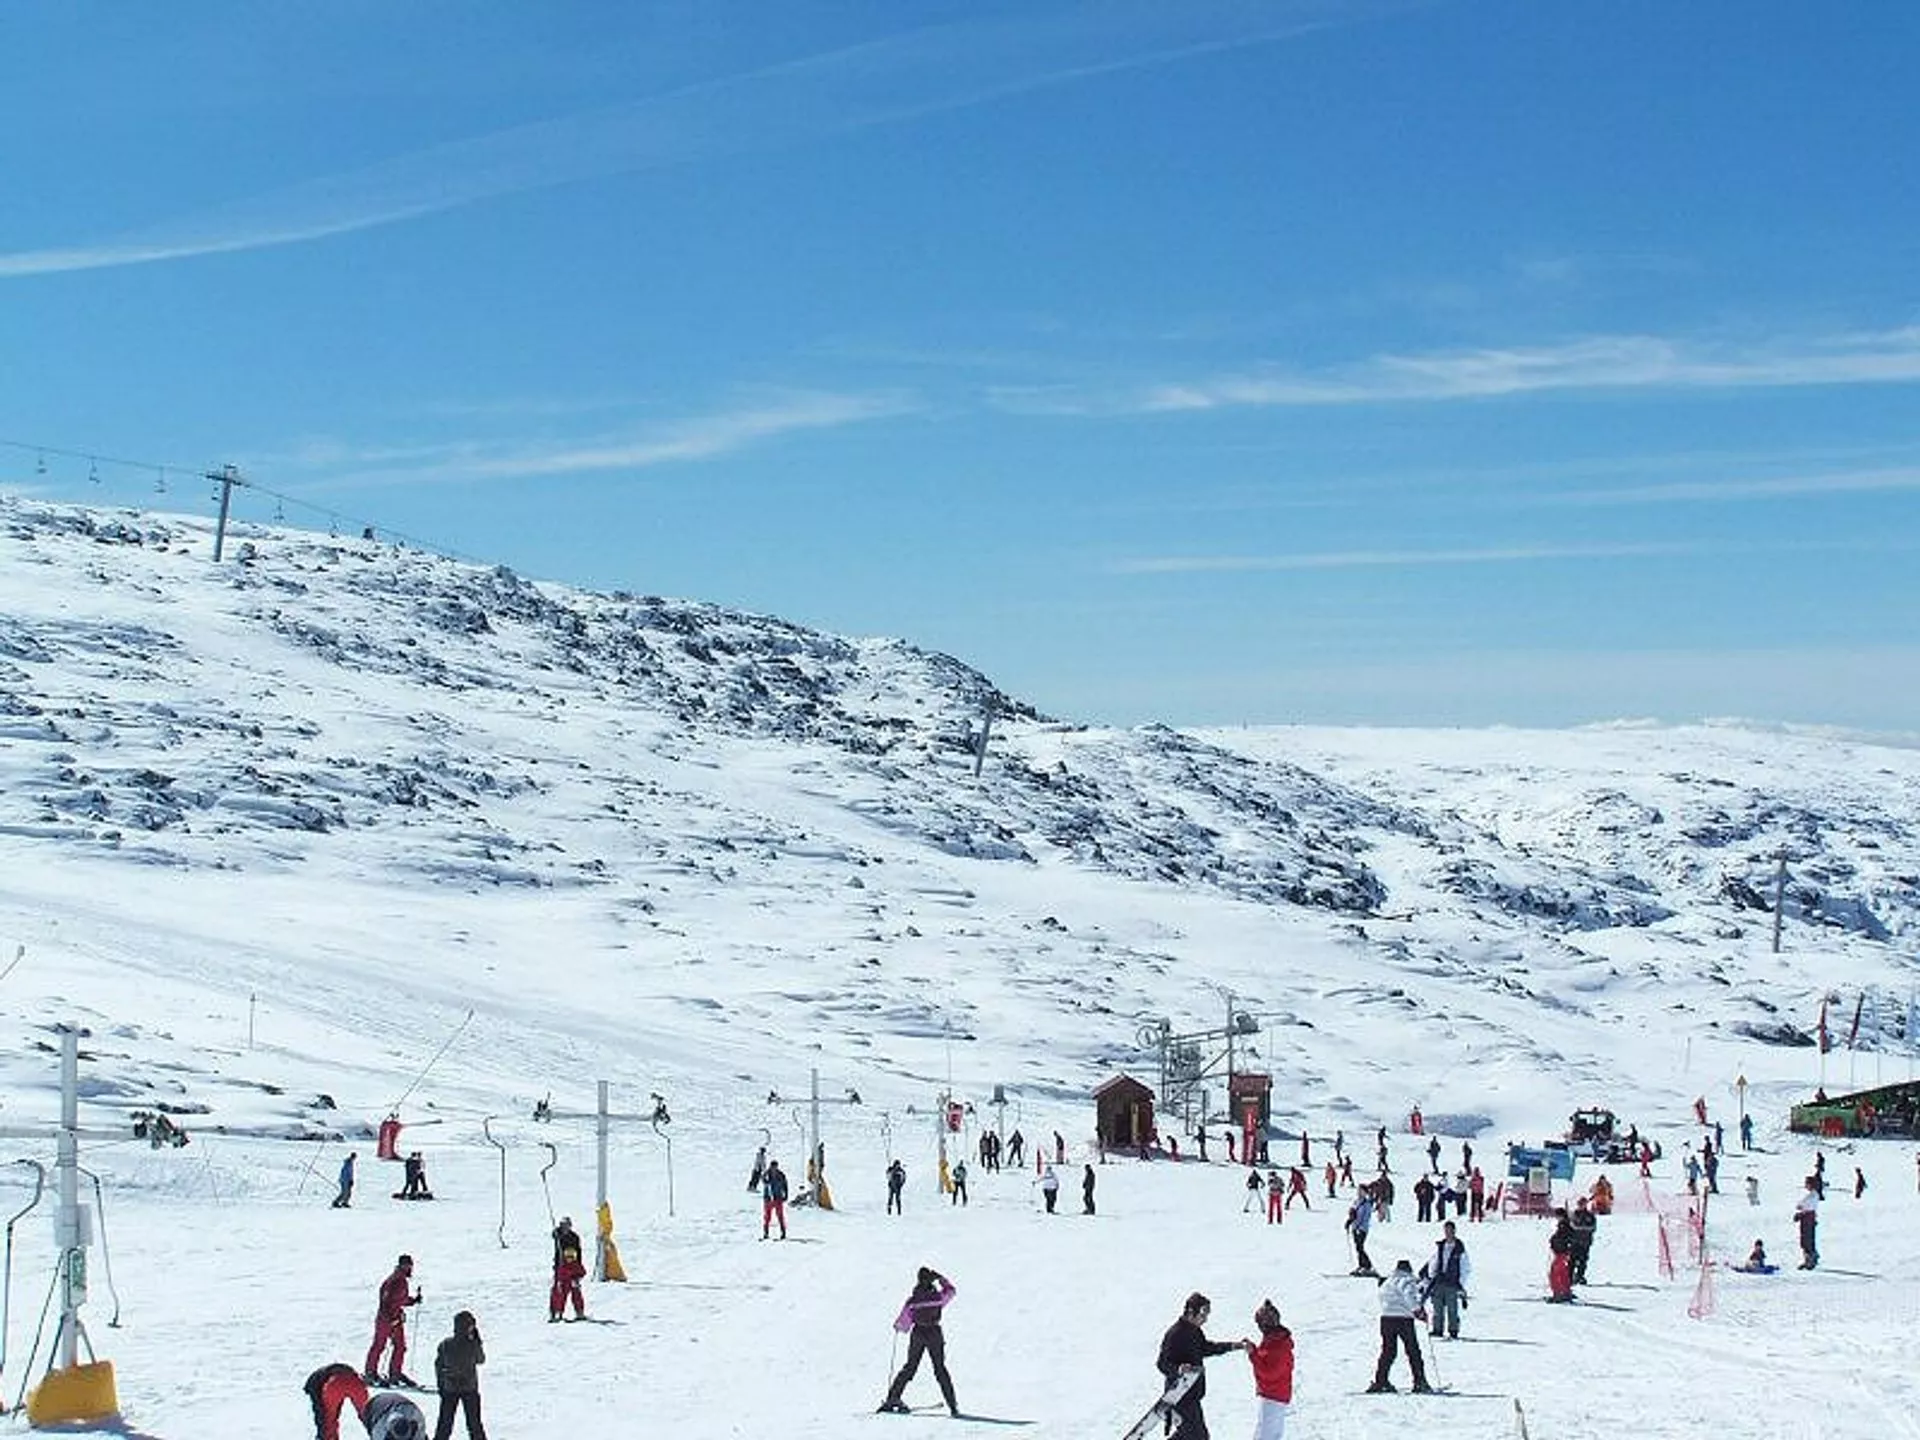 Vodafone Ski Resort in Portugal, Europe | Snowboarding,Skiing,Snowmobiling - Rated 4.1